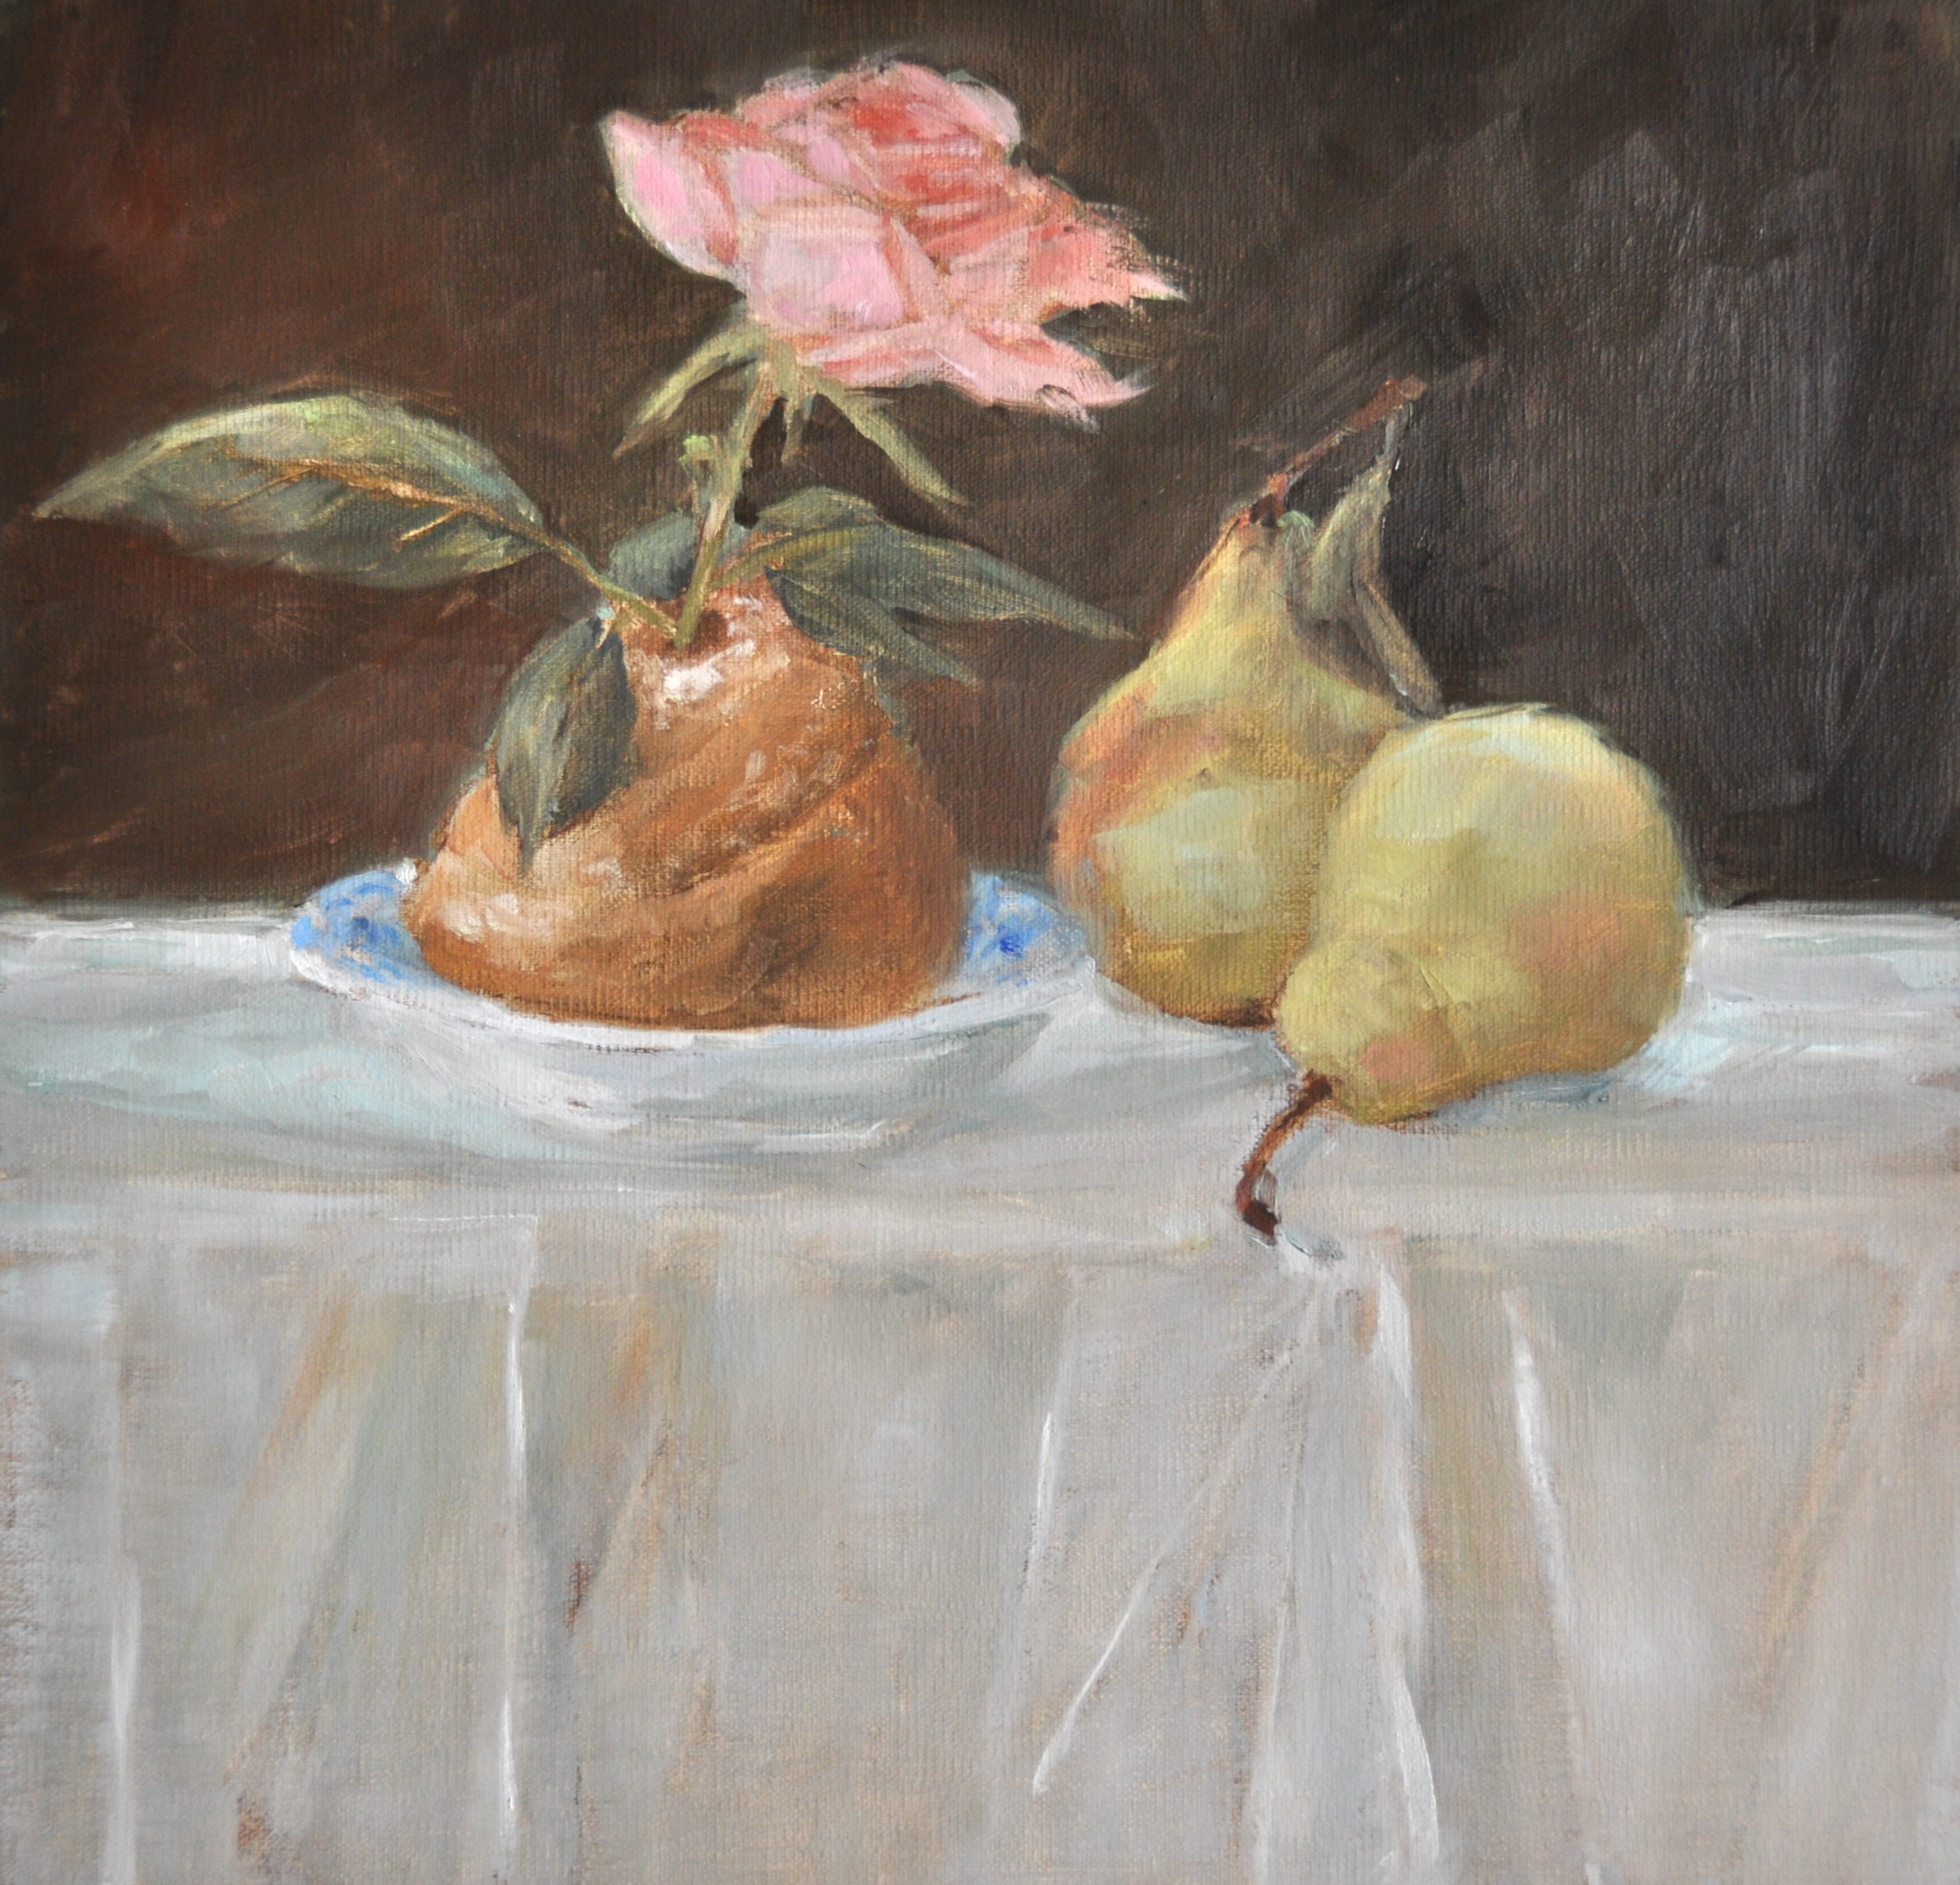 After Manet's Brioche, Oil on Linen, 12 x 12, sold